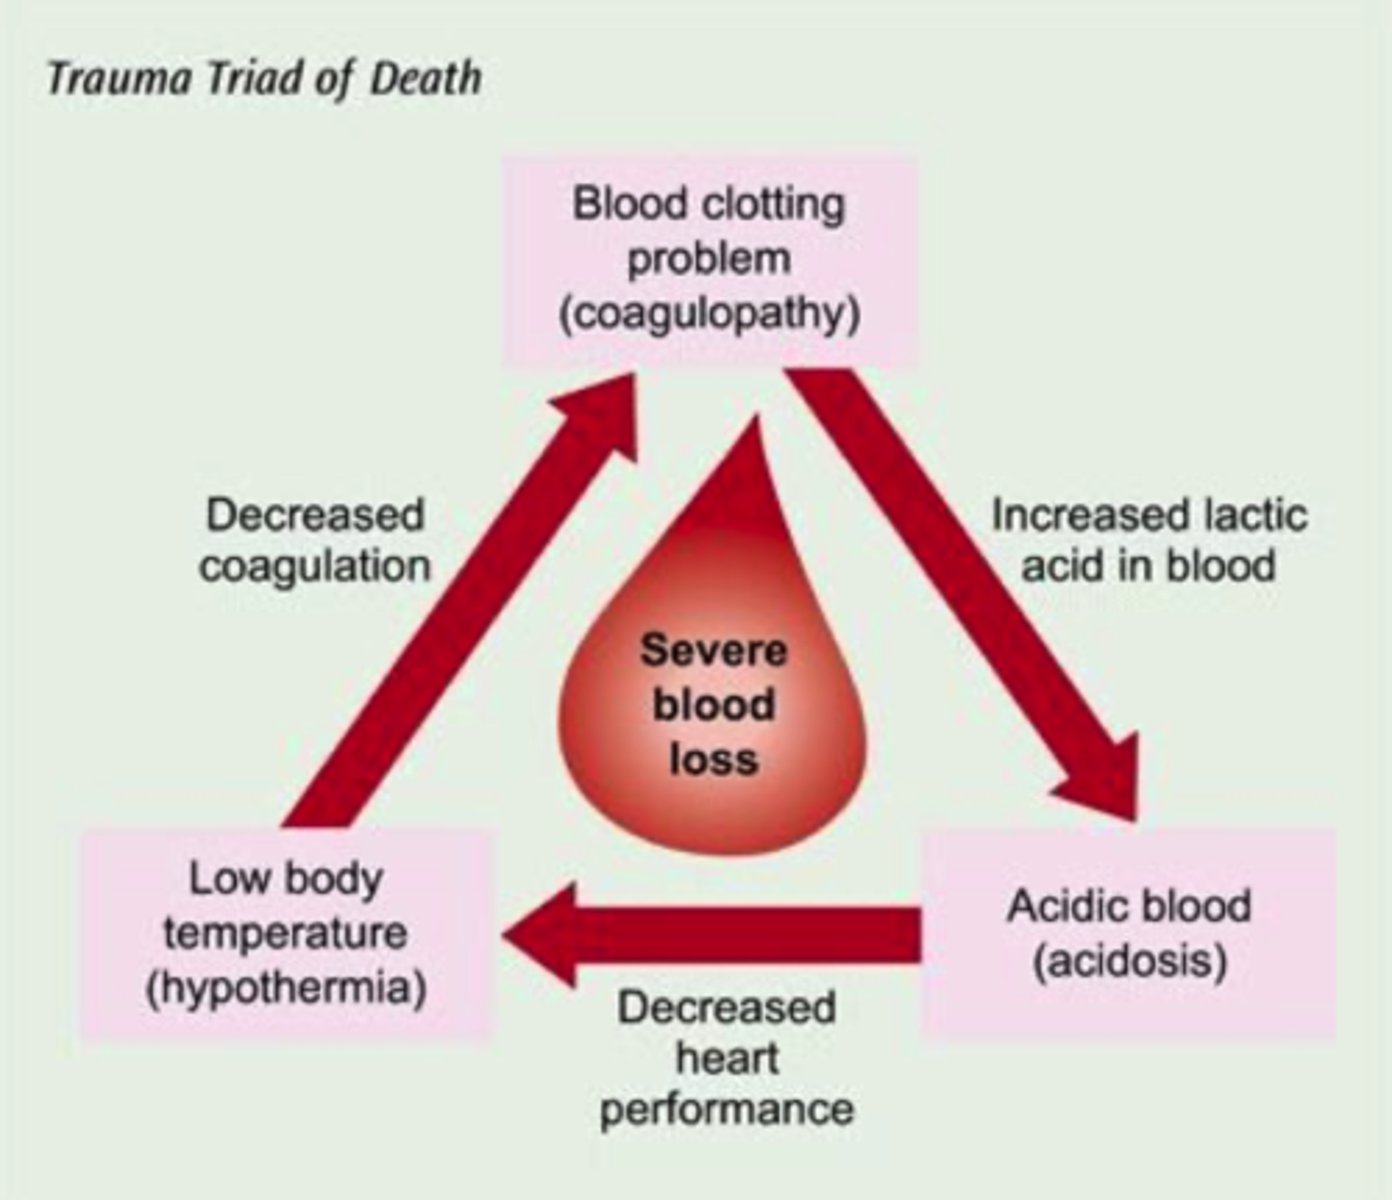 <p>- dependent on temperature and pH b/c of its complex enzymatic properties and reactions, which help to form blood clots to stop internal/external bleeding</p><p>- describes disease states of impaired blood clotting synthesis/thrombosis</p><p>- d/t hypothermia, acidosis, AND loss clotting factors through hemorrhage and hemodilution --> which leads to an overuse by the body (which further depletes clotting factors)</p><p>- leads to continued hemorrhage in the bleeding trauma pt</p>